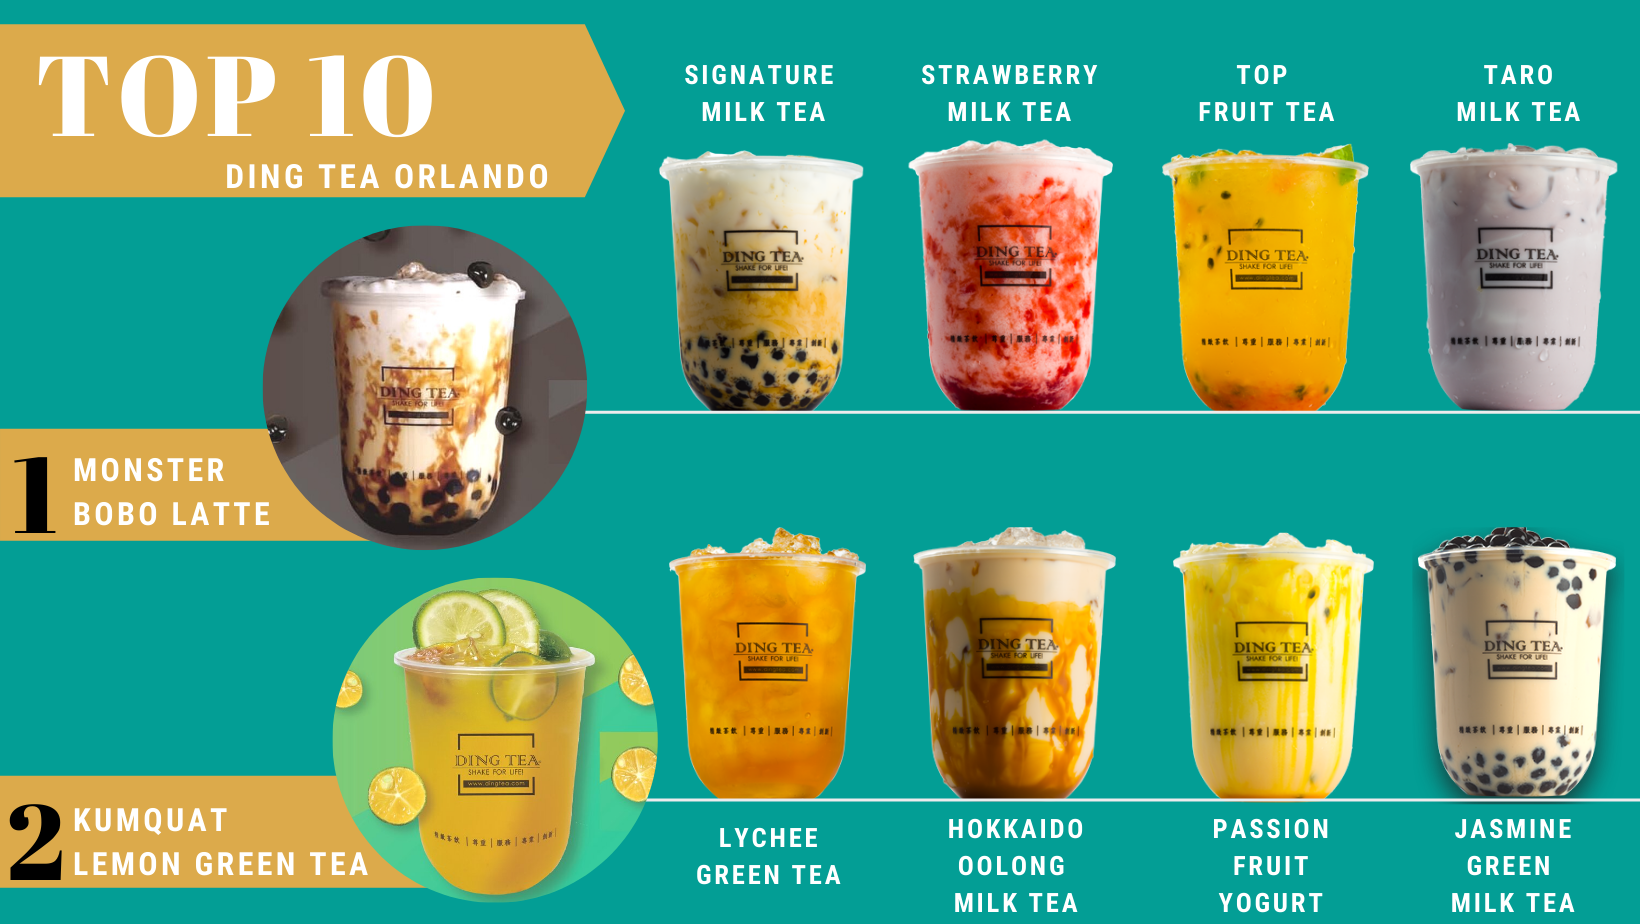 First Look: Ding Tea opens first Orlando location - Tasty Chomps